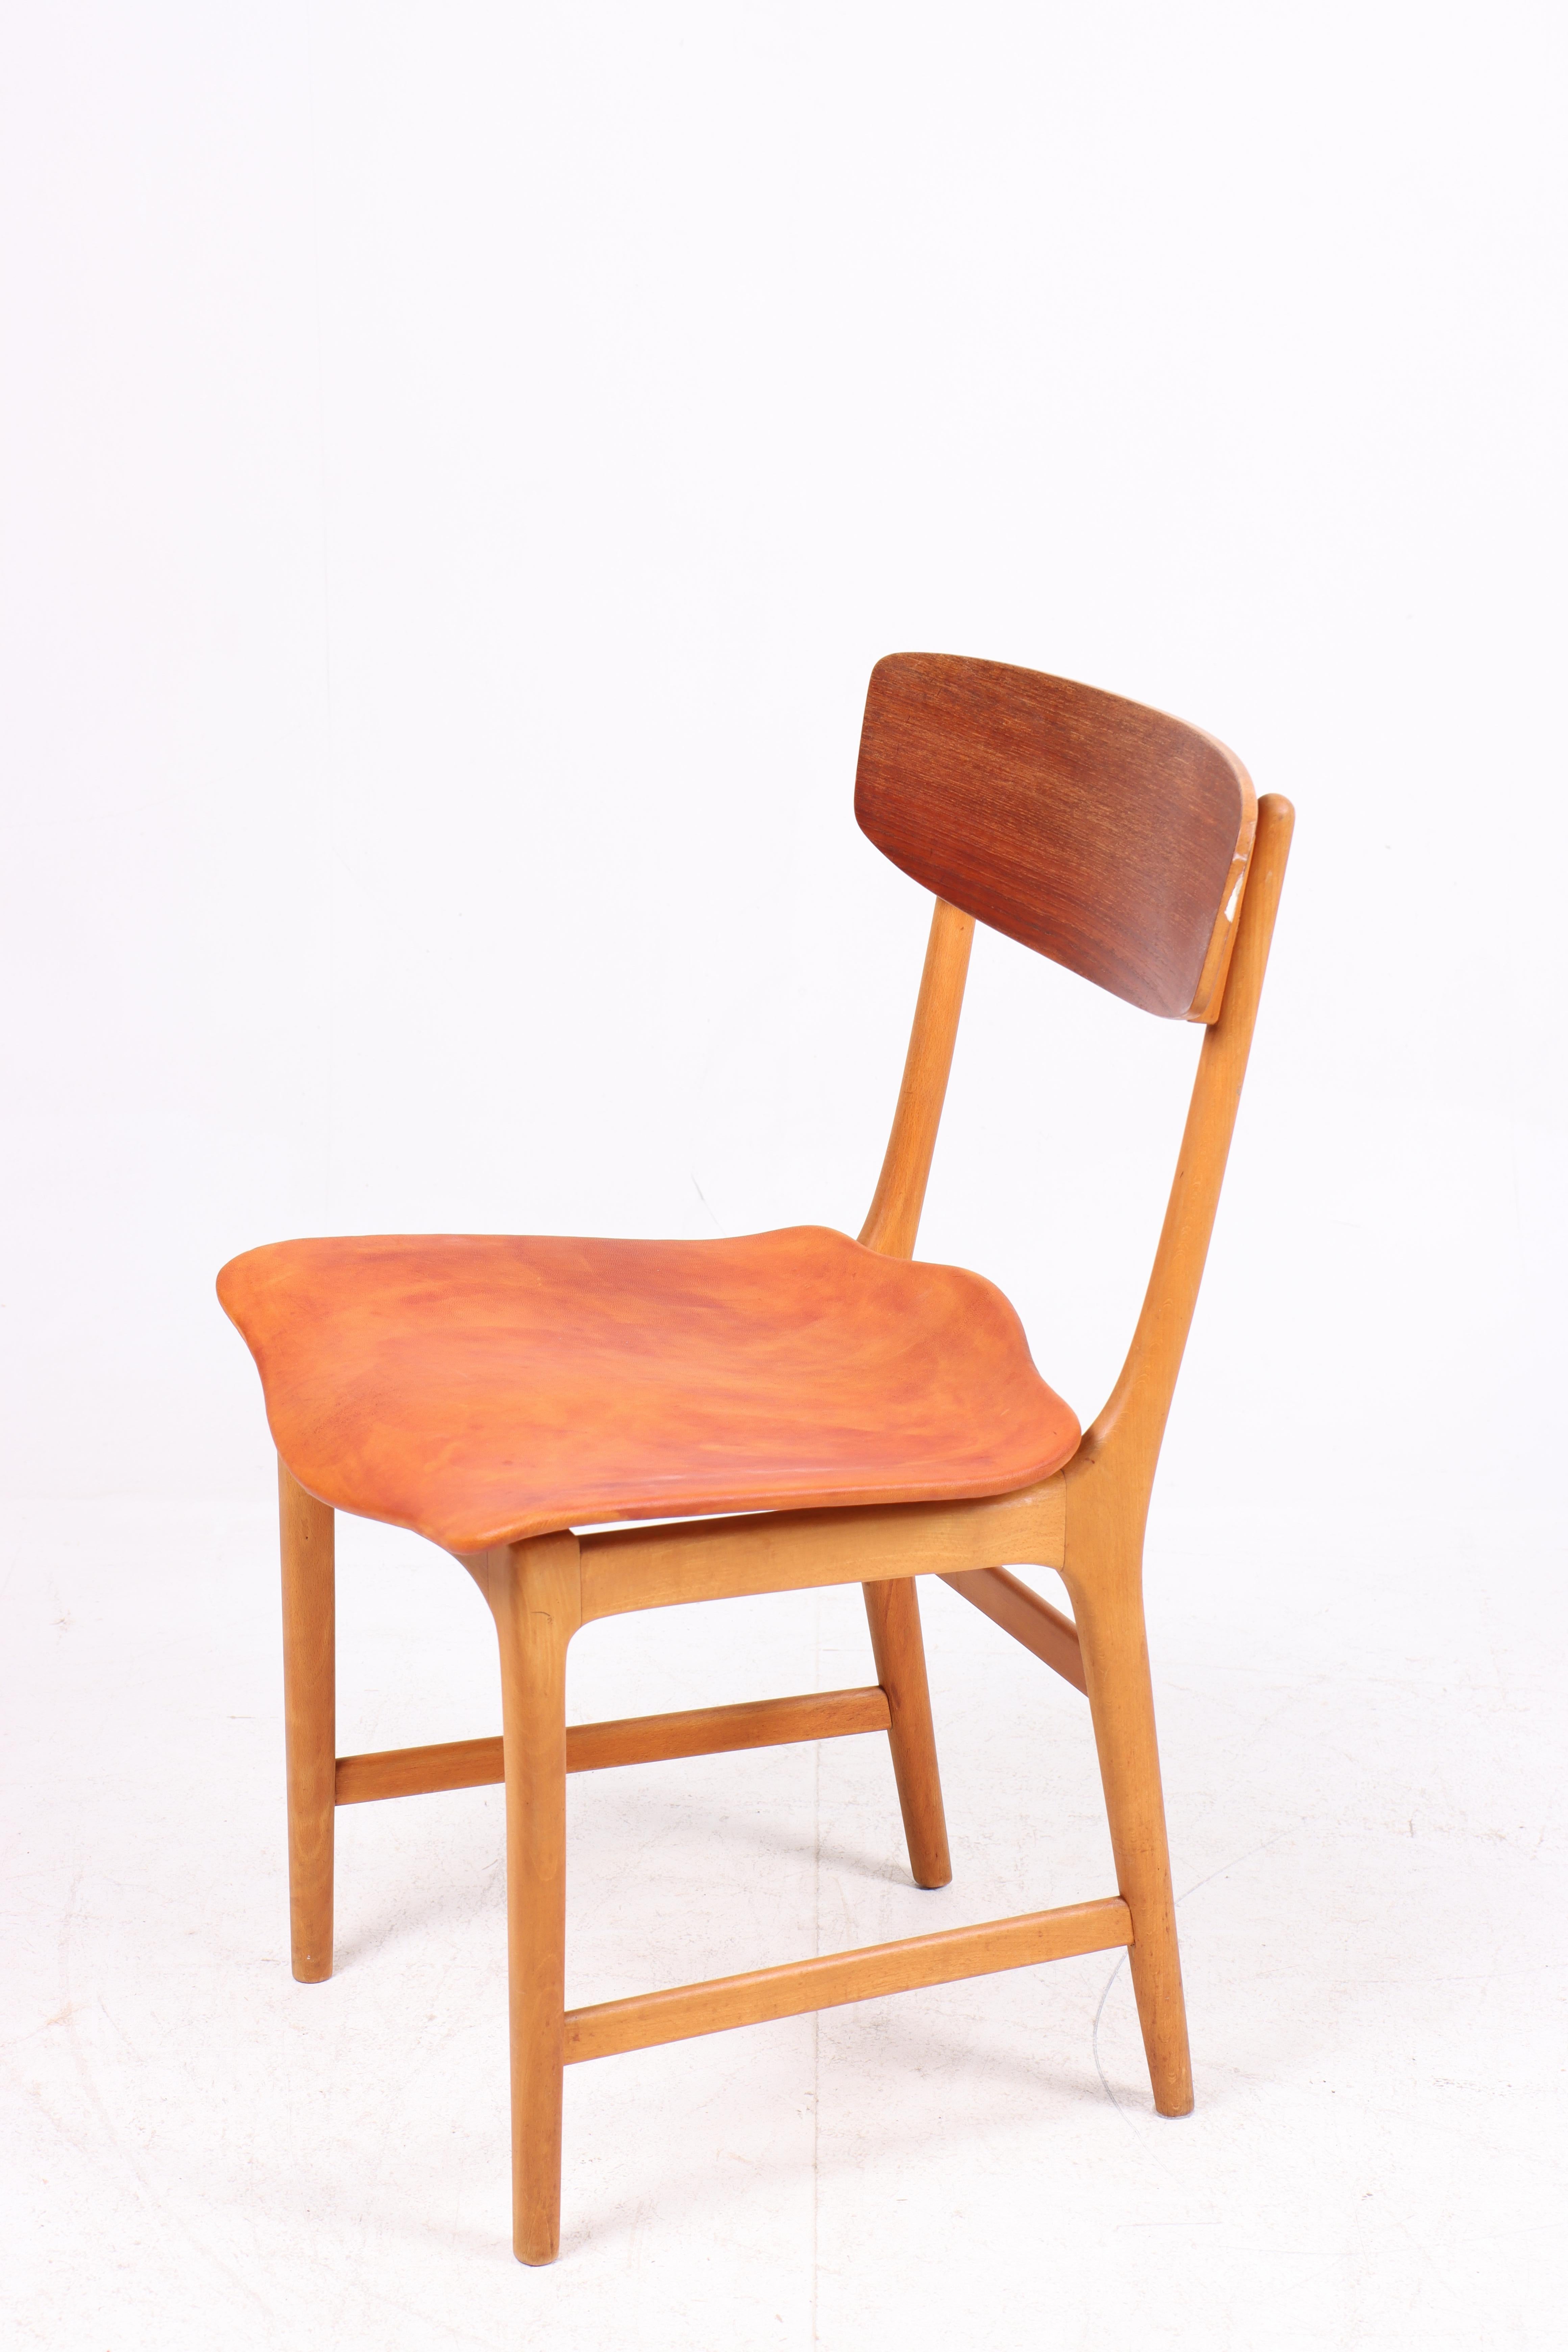 Set of Four Side Chairs in Teak and Leather, Danish Design, 1960s For Sale 1